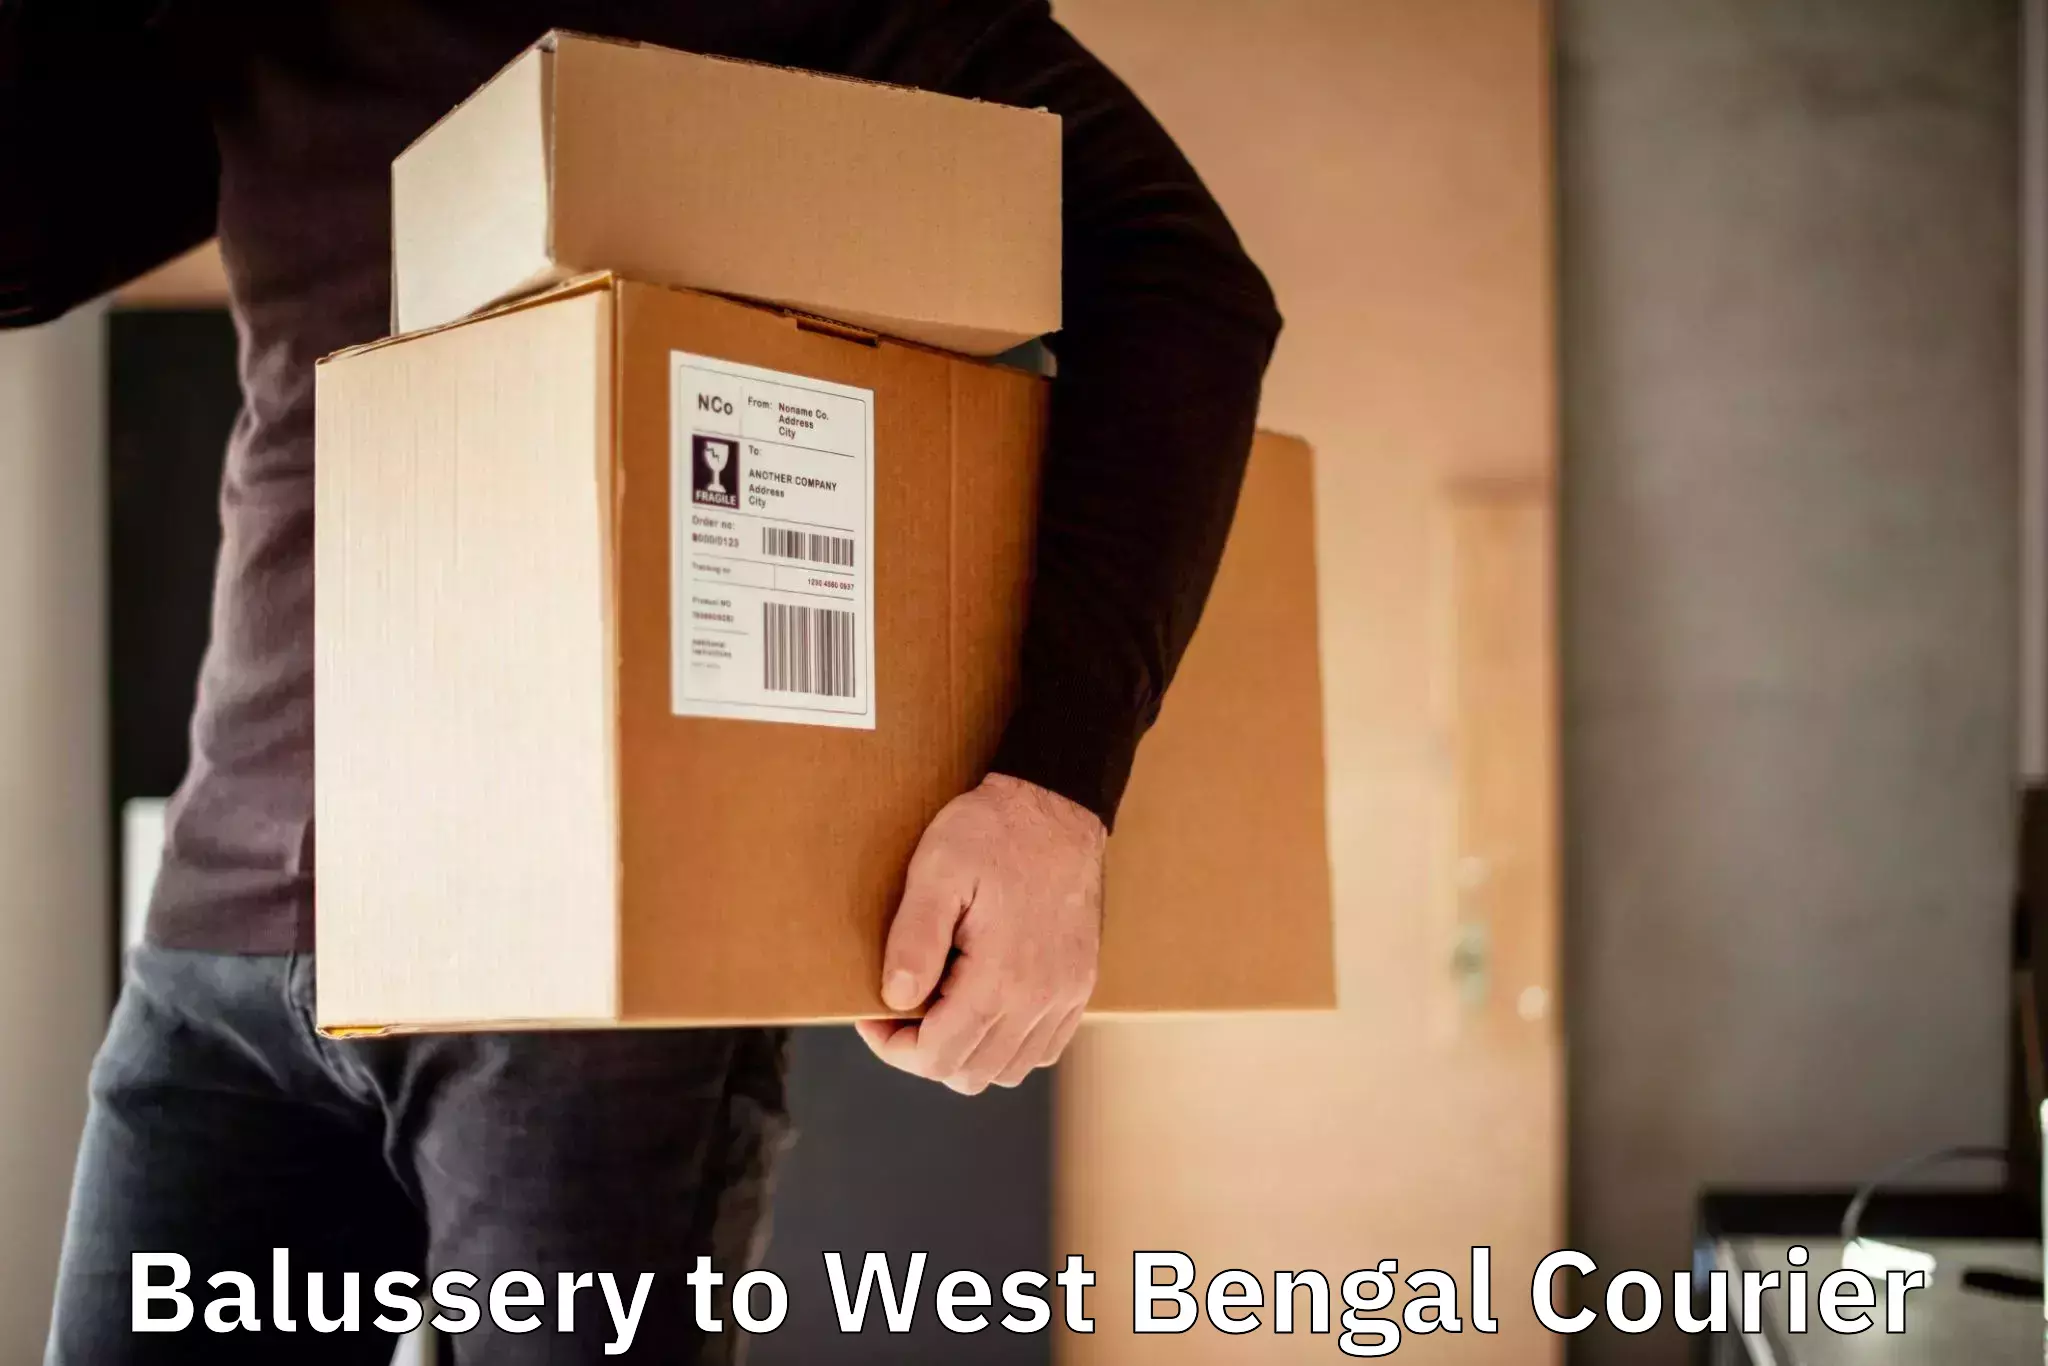 Package delivery network Balussery to West Bengal